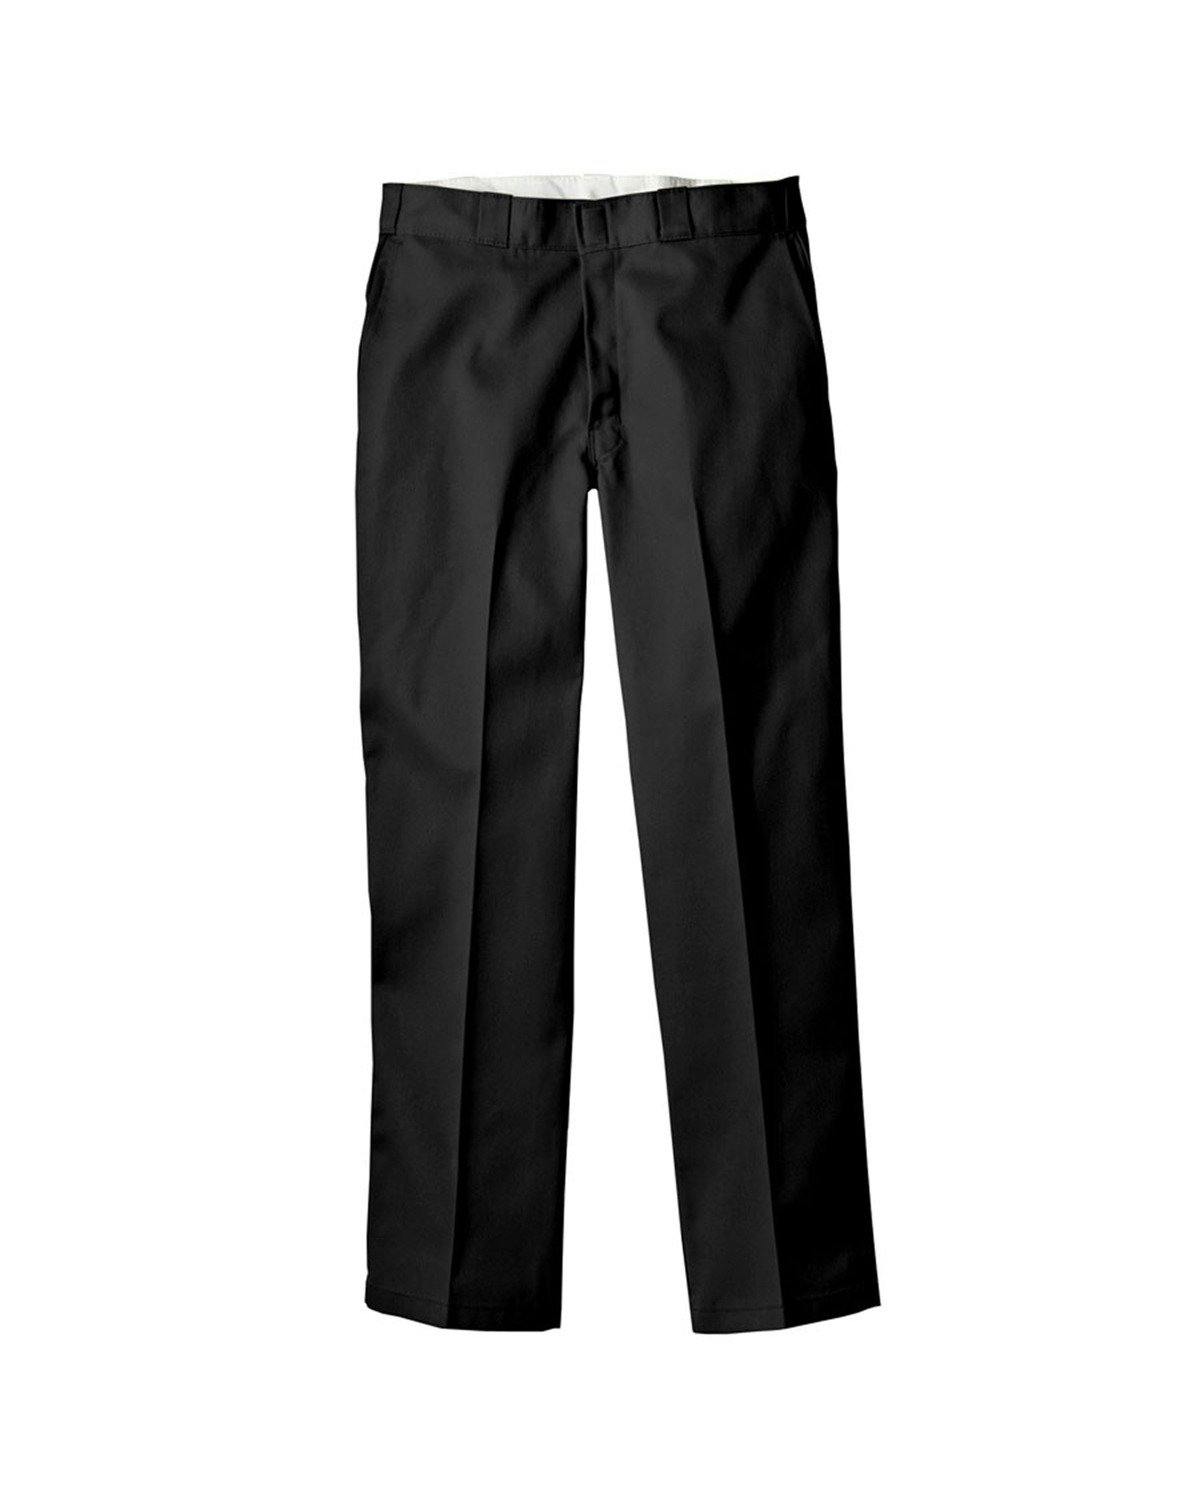 Image for Men's Twill Work Pant